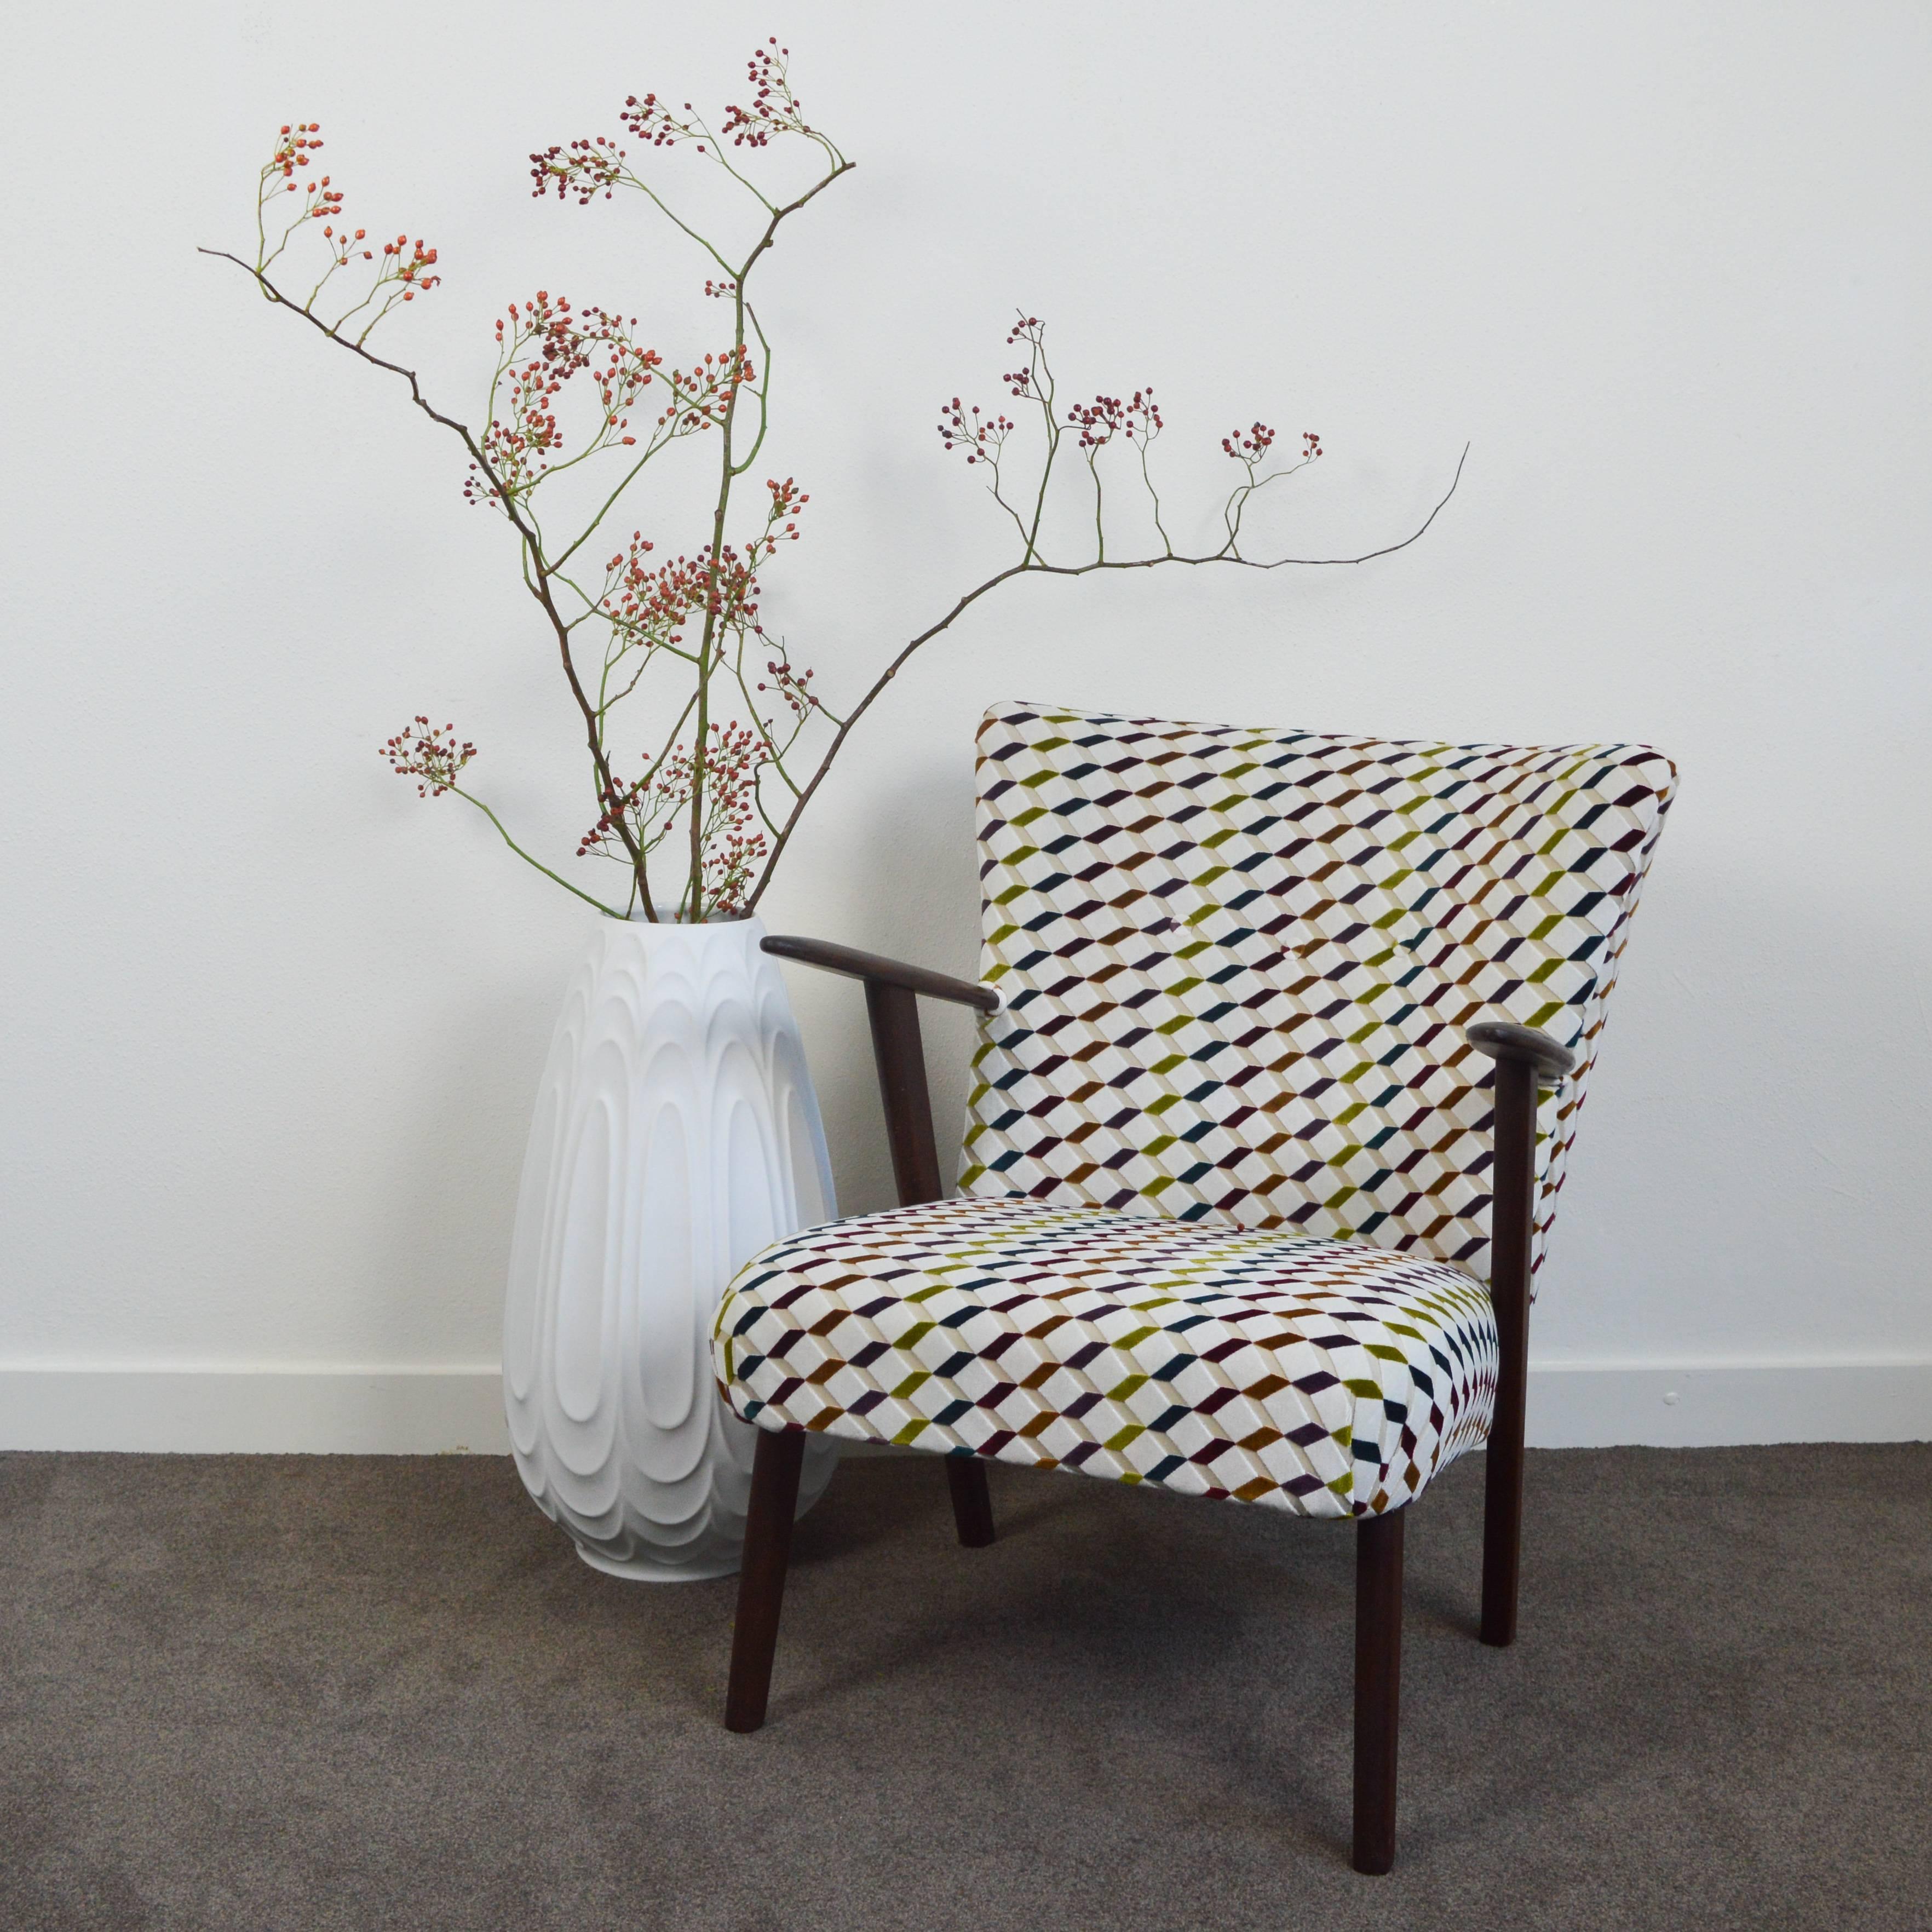 Fabric Vintage Re-Upholstered Club Chair, Denmark, 1960s For Sale